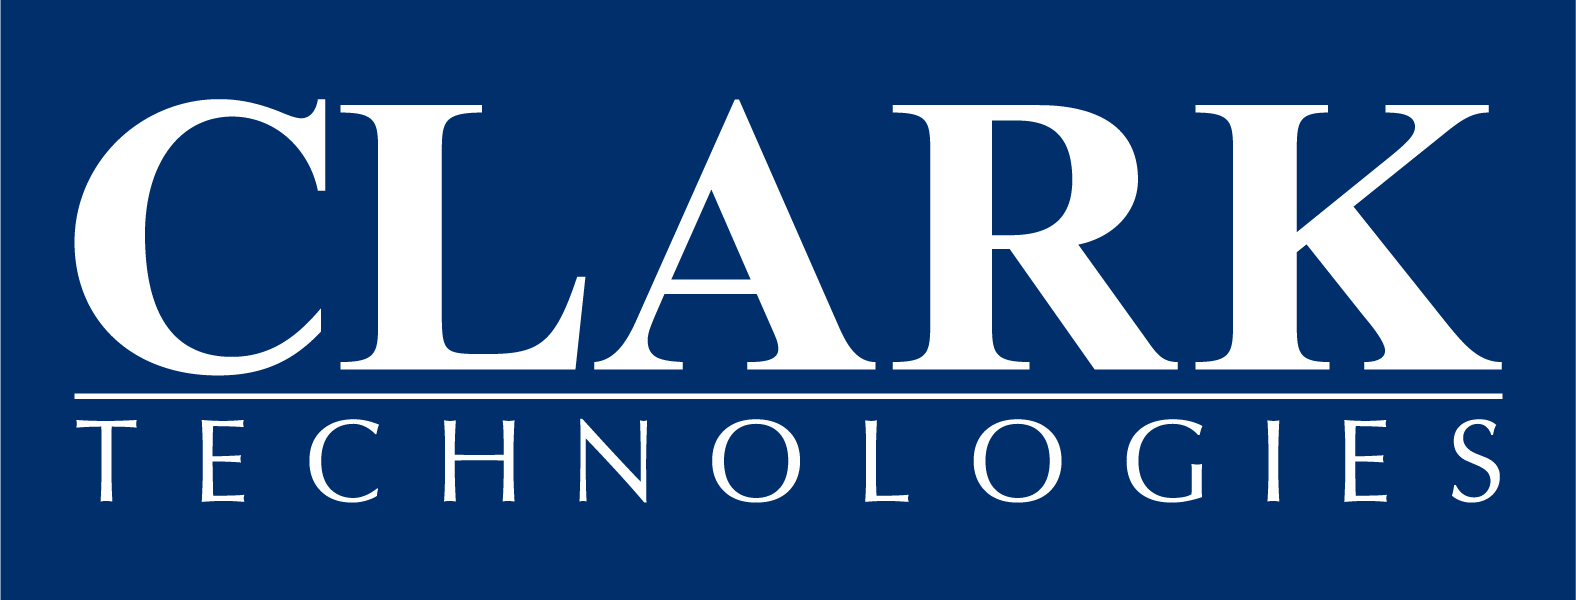 Clark technologies (logo) is a leading builder of data centers and mission-critical facilities